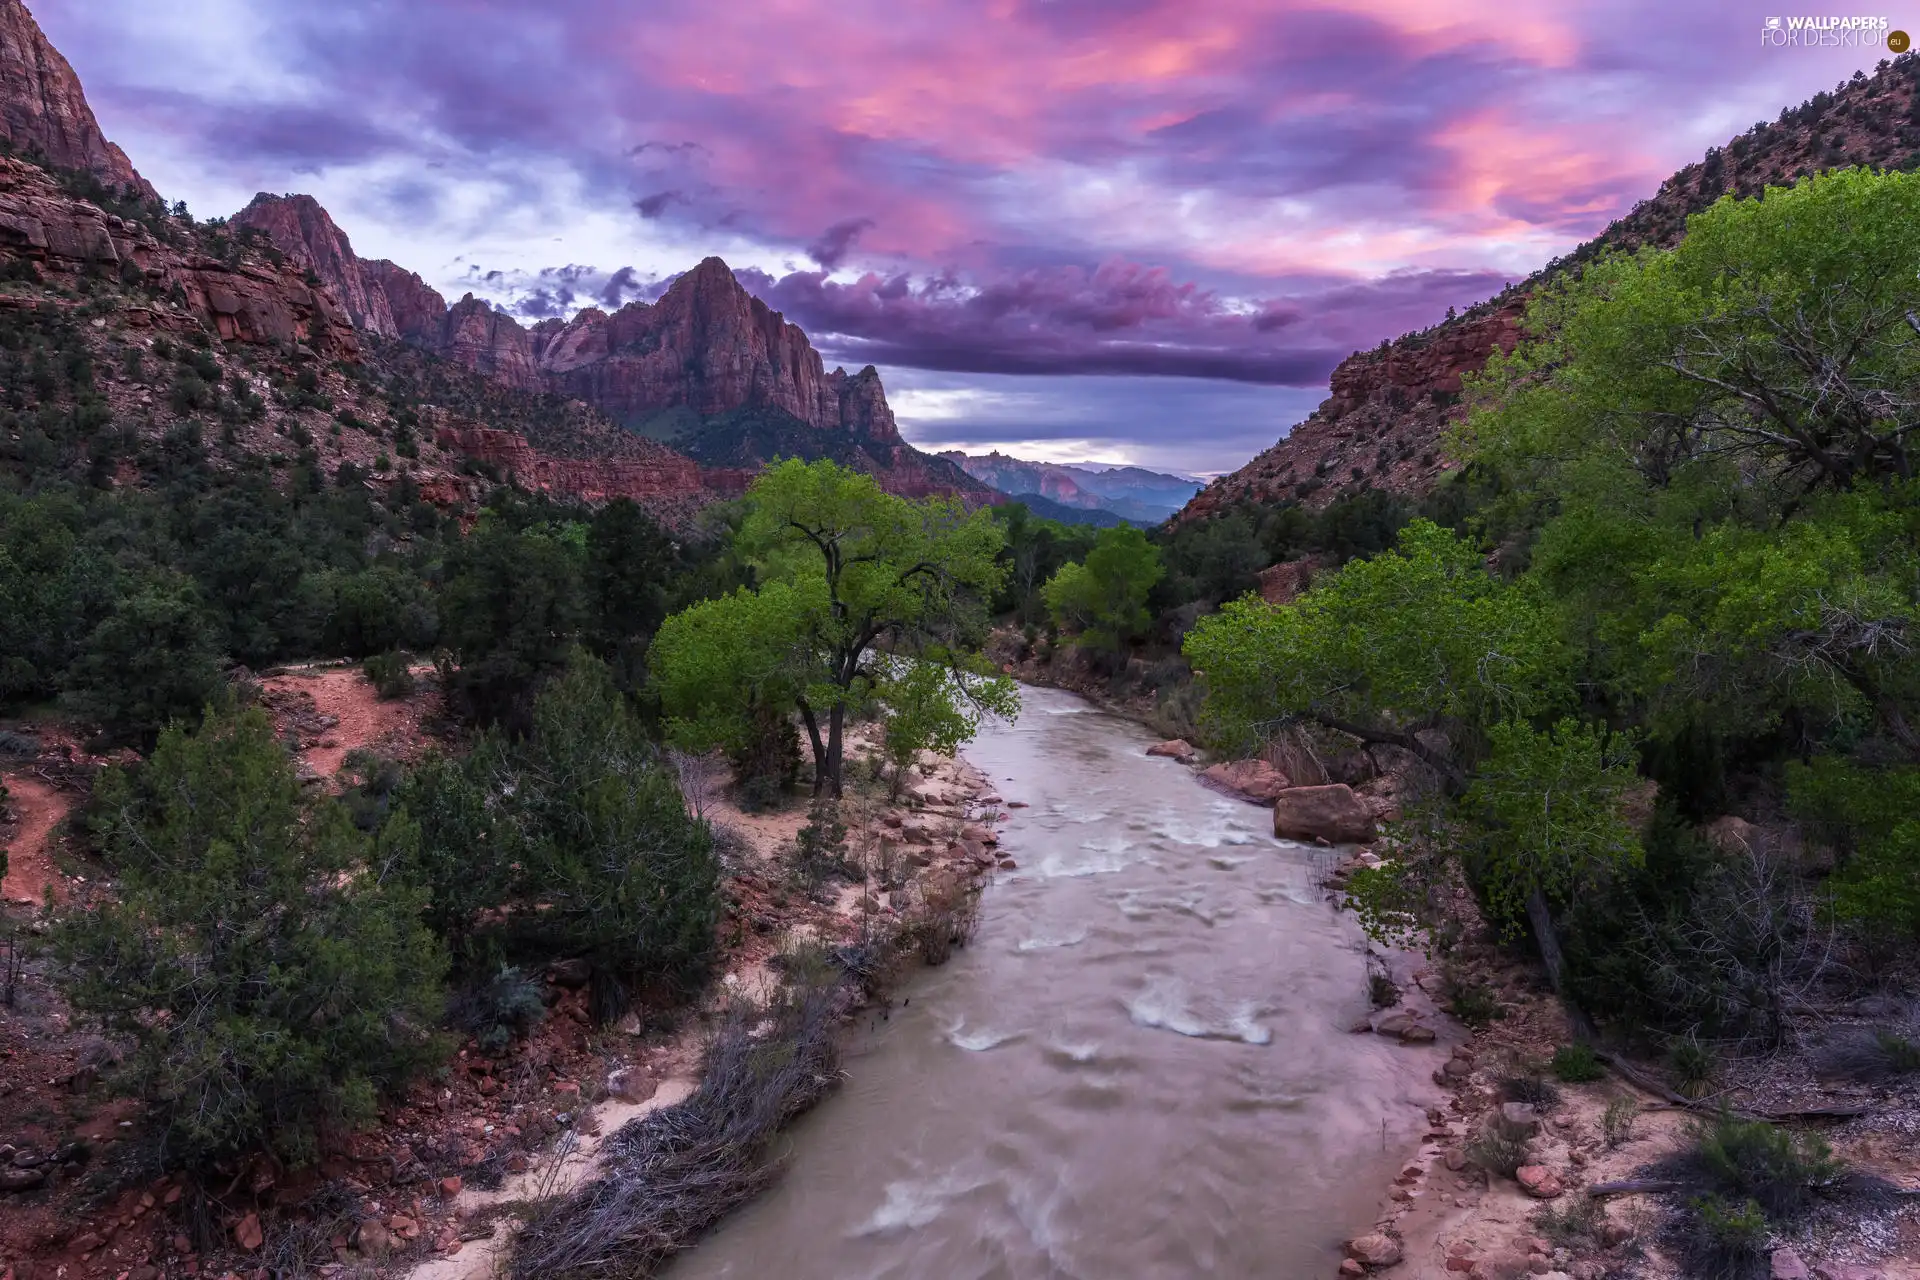 rocks, Virgin River, clouds, trees, Stones, Great Sunsets, Mountain Watchman, Zion National Park, The United States, viewes, River, Utah State